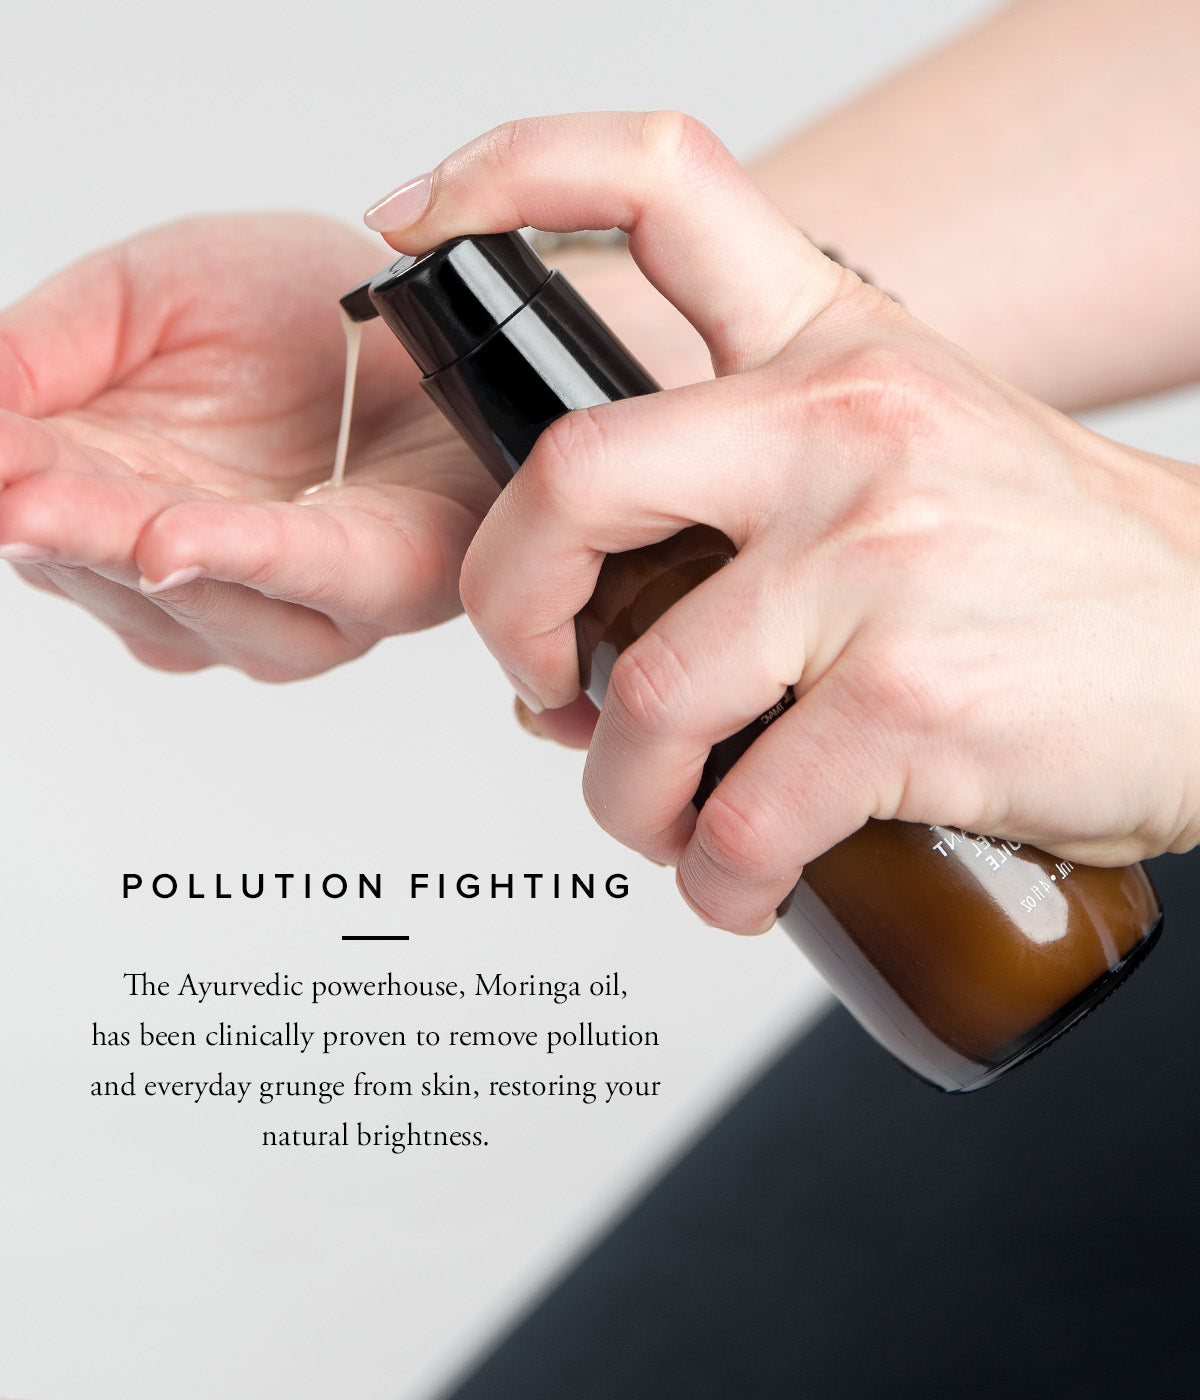 Pollution Fighting   The Ayurvedic powerhouse, Moringa oil, has been clinically proven to remove pollution and everyday grunge from skin .